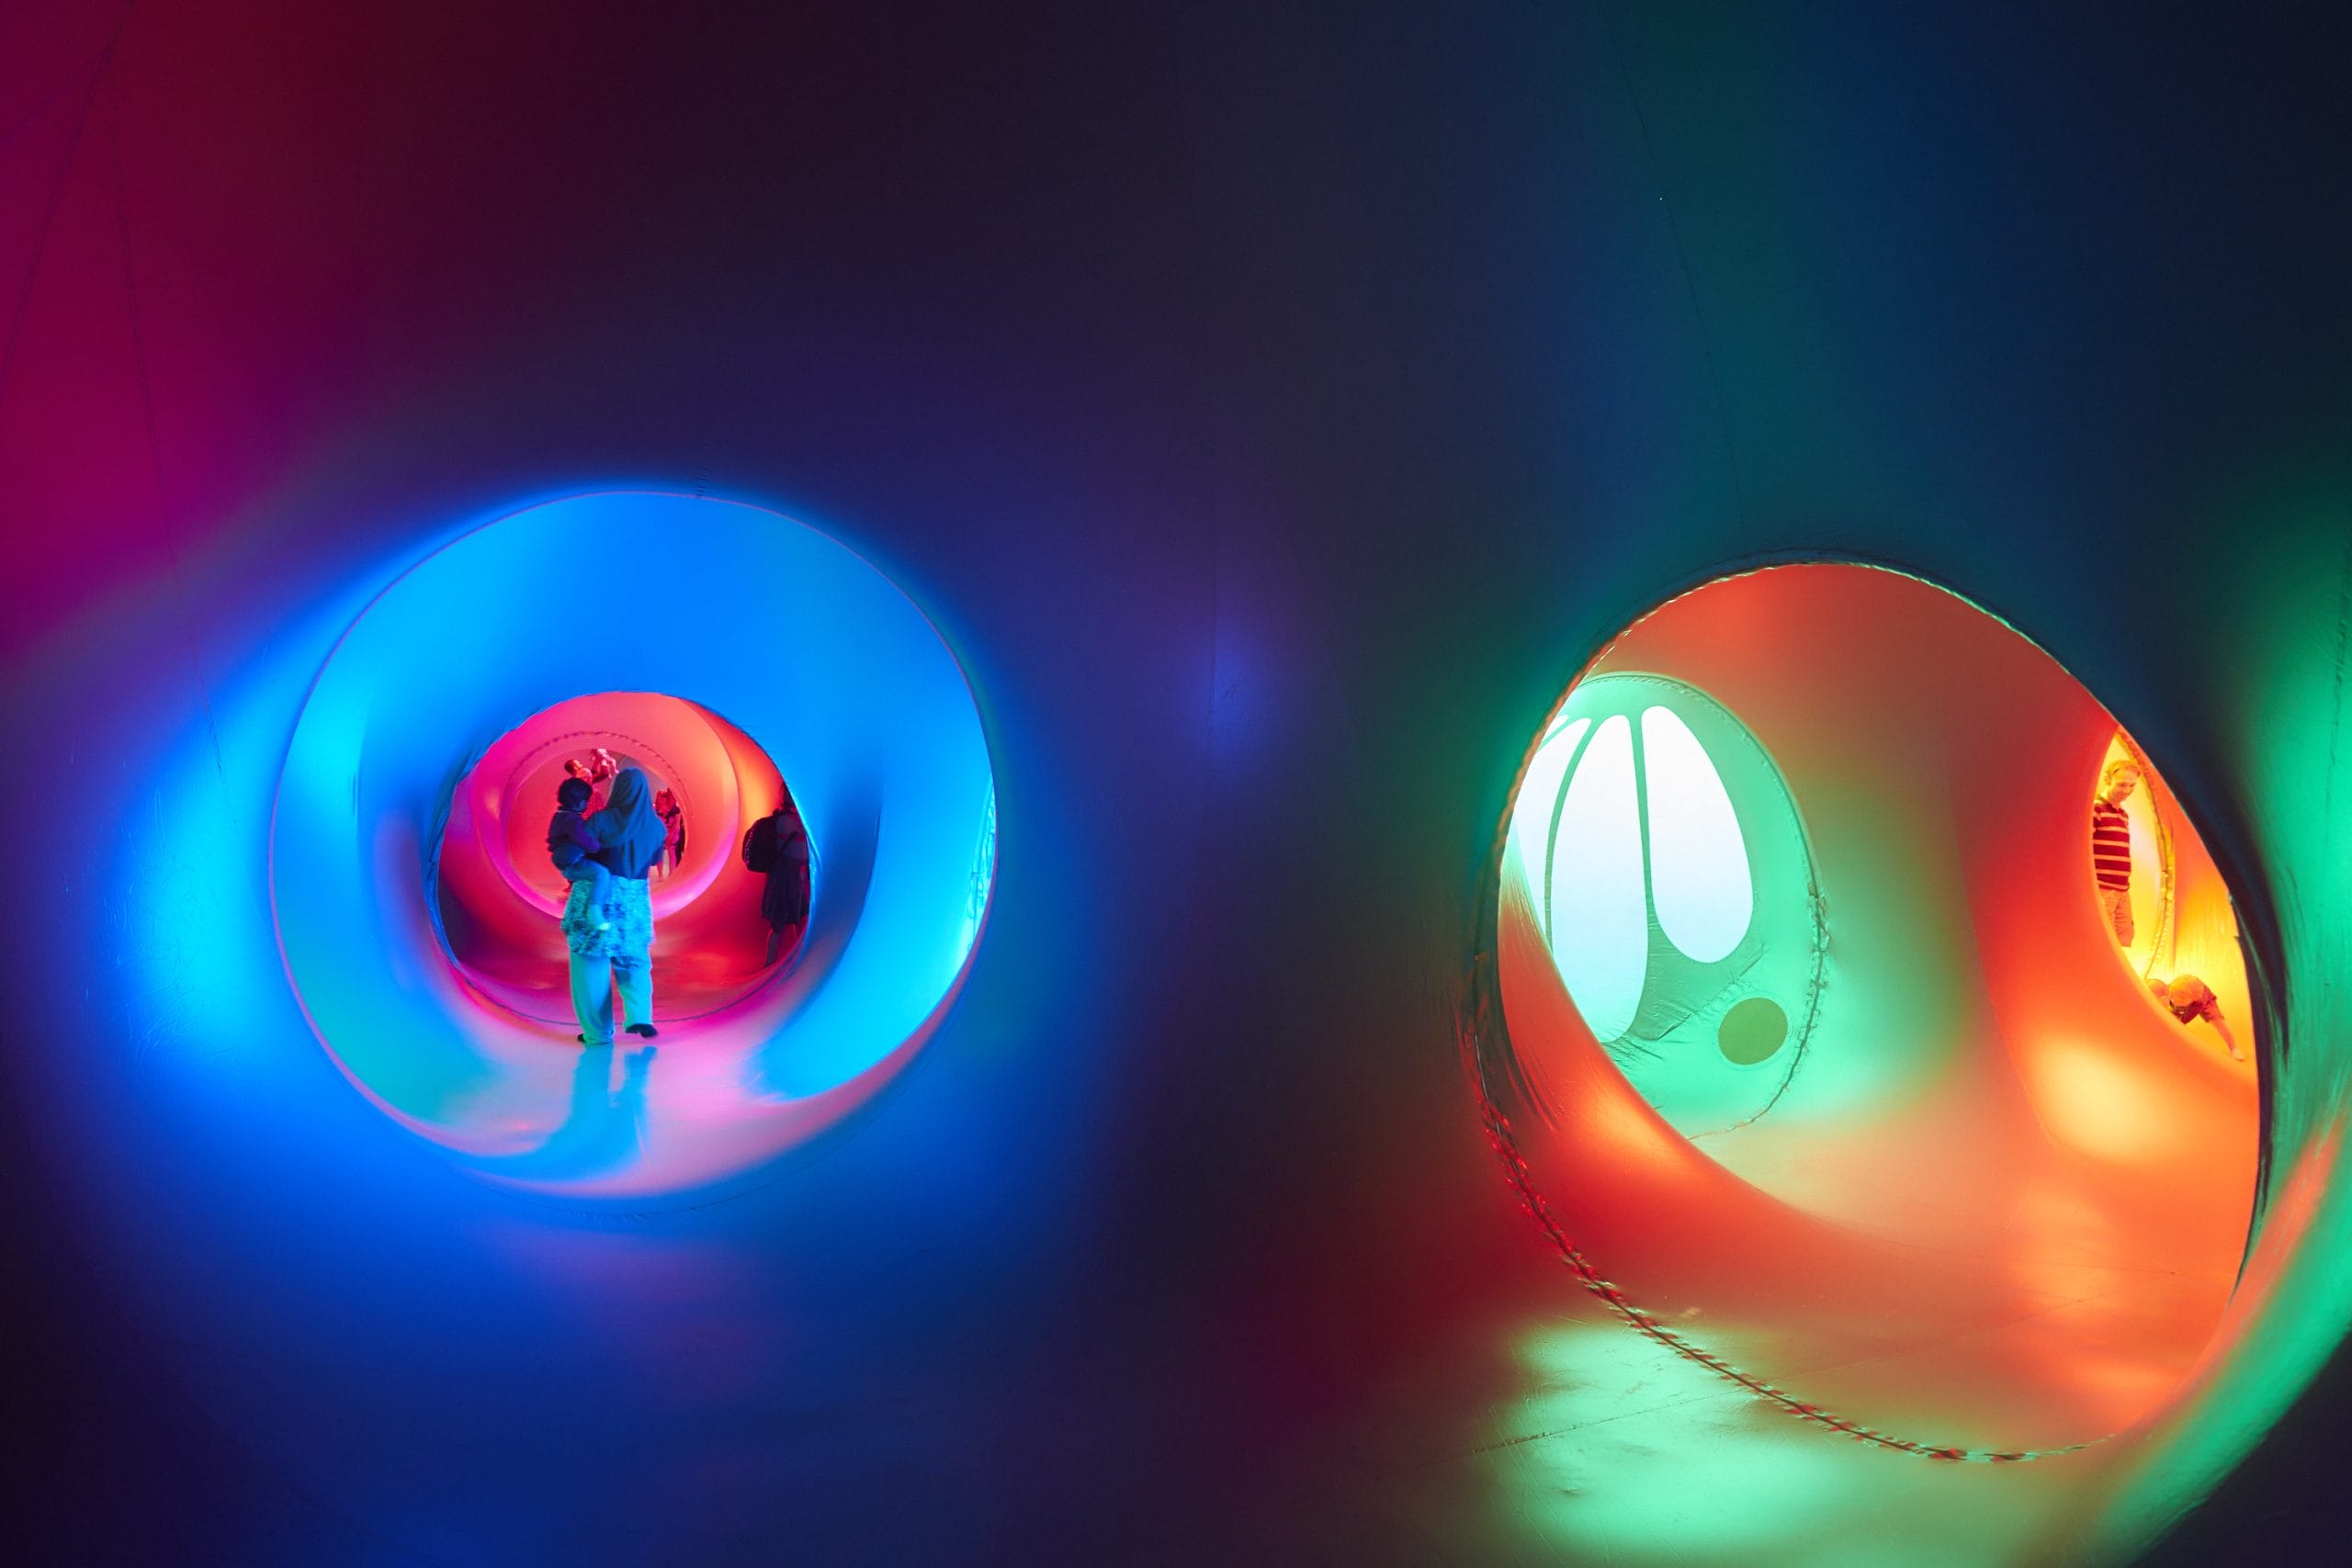 A lady with her back to the camera carries a small child through a tunnel in the luminarium. The tunnel glows blue, with reds and pinks further ahead. To the right, greens, reds and golds can be seen in another section of the luminarium, with a man and child seen emerging round the corner.